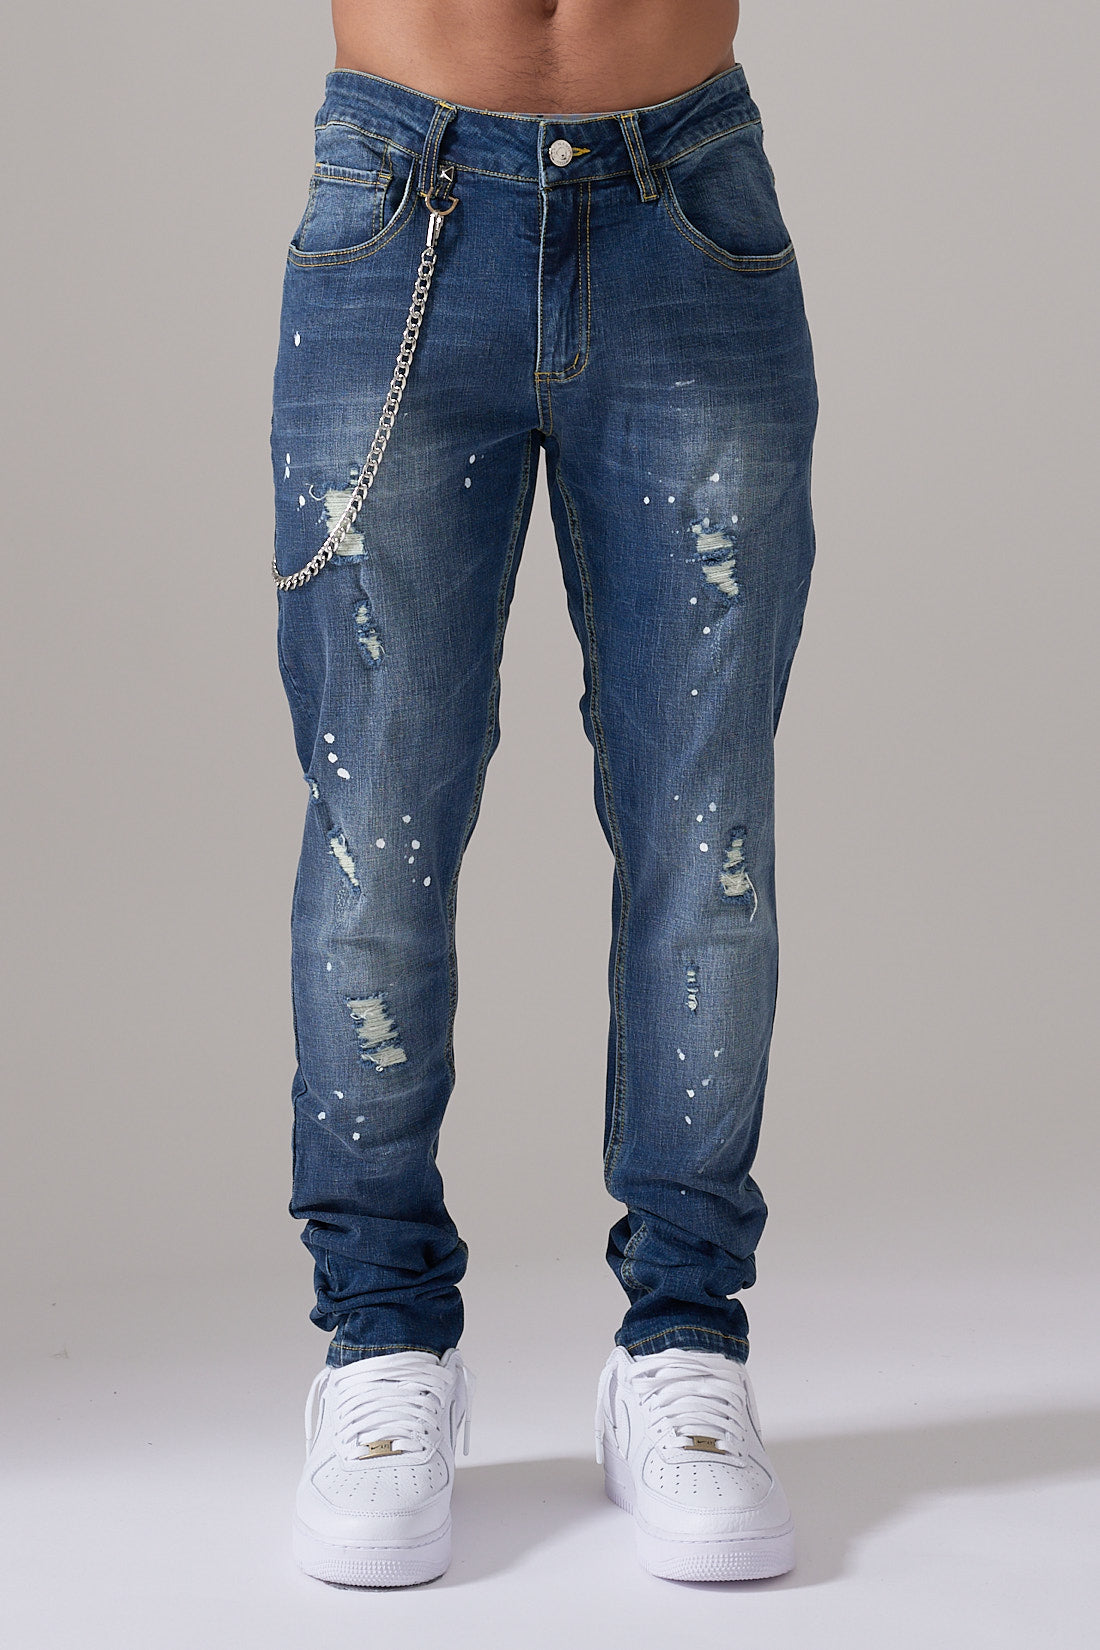 WASHED SPLASH PAINT BLUE RIPPED DENIM JEANS WITH METAL PLAQUE